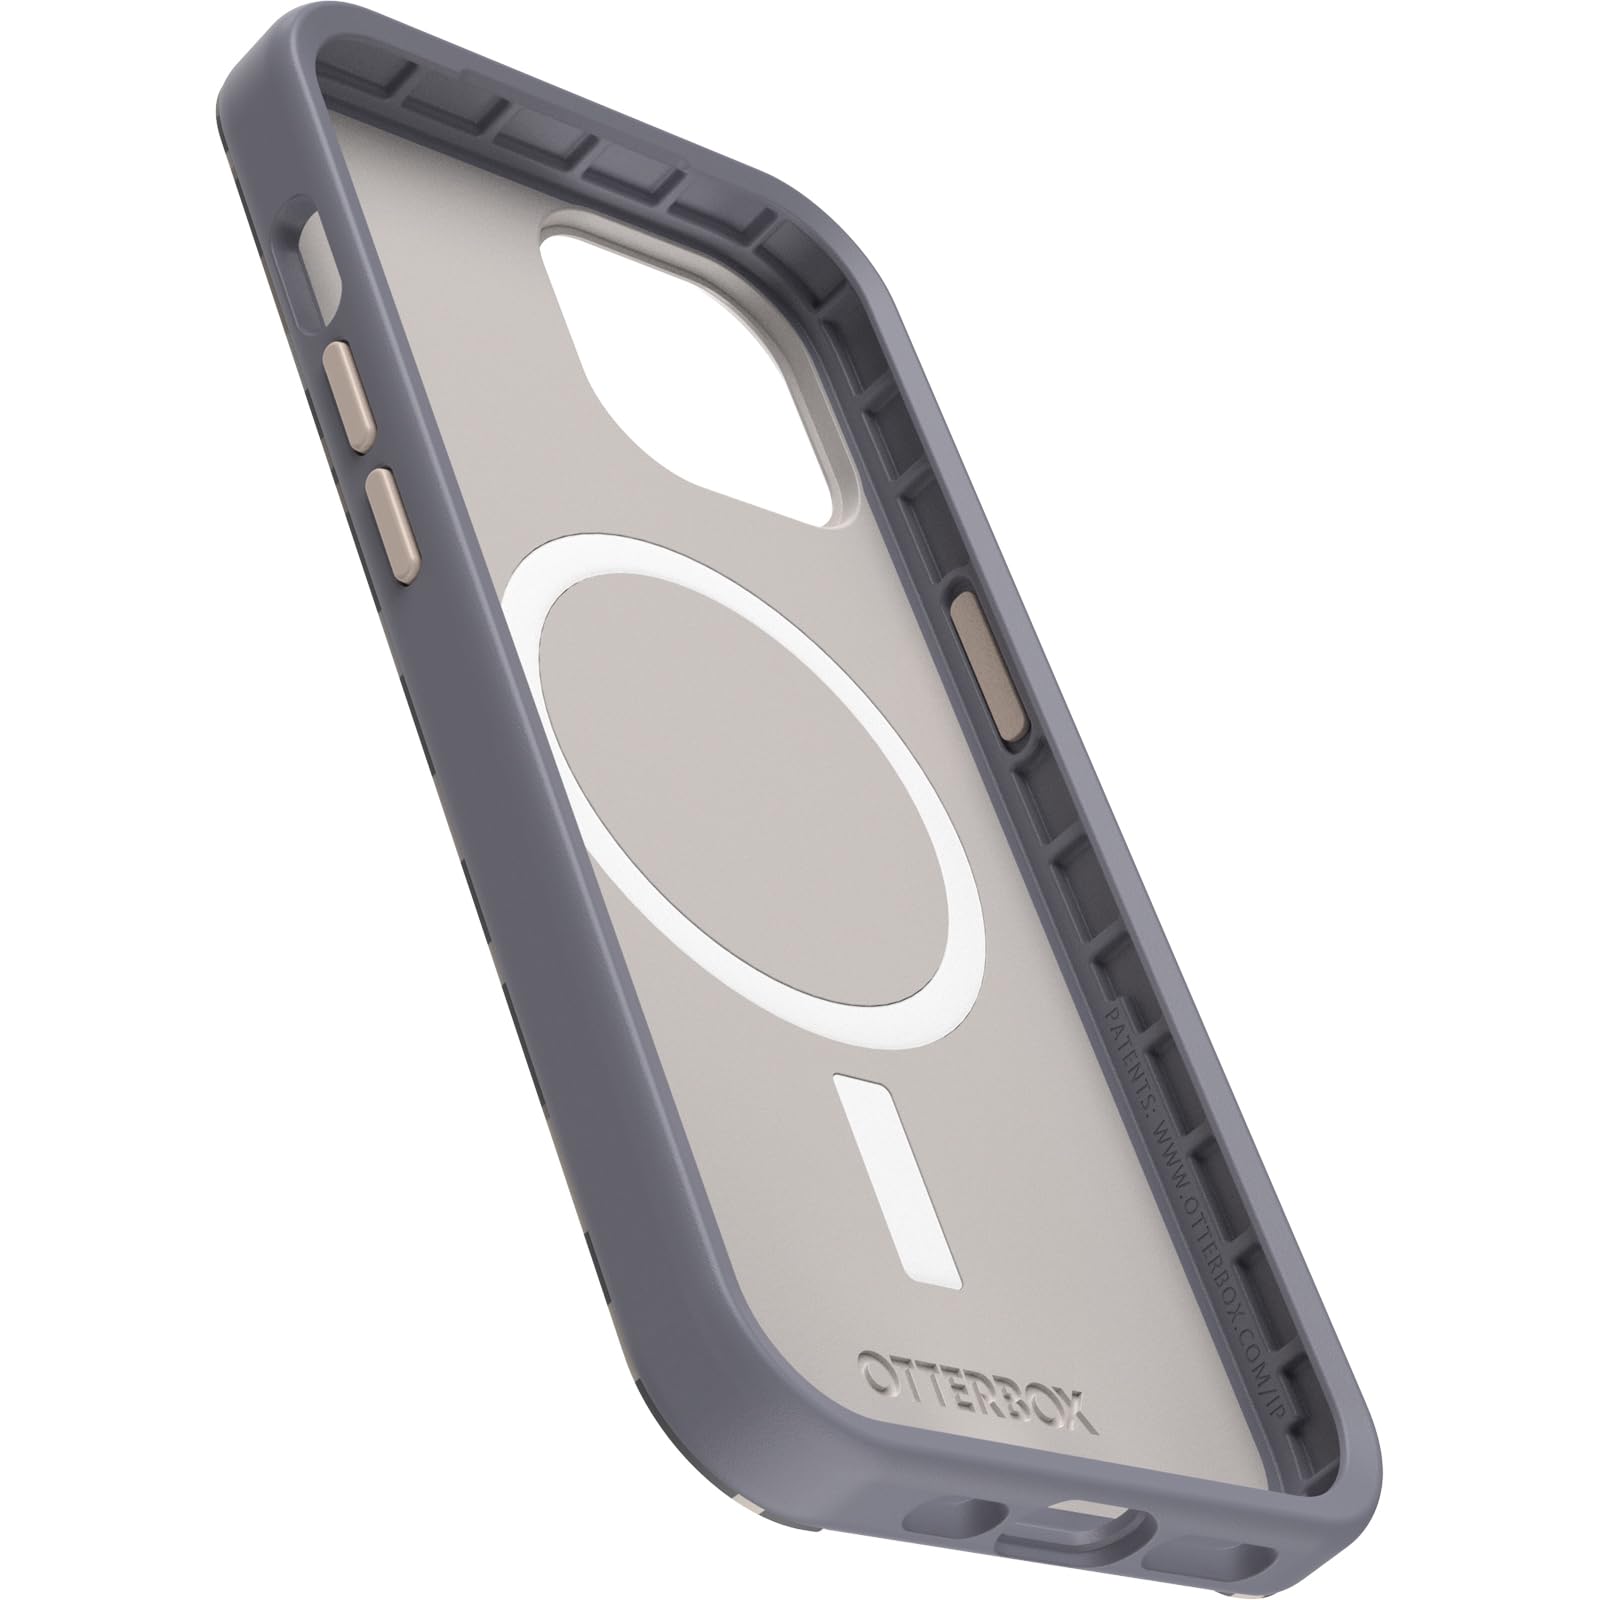 OtterBox iPhone 15, iPhone 14, and iPhone 13 Symmetry Series Case - WILDCAT (Grey), snaps to MagSafe, ultra-sleek, raised edges protect camera & screen